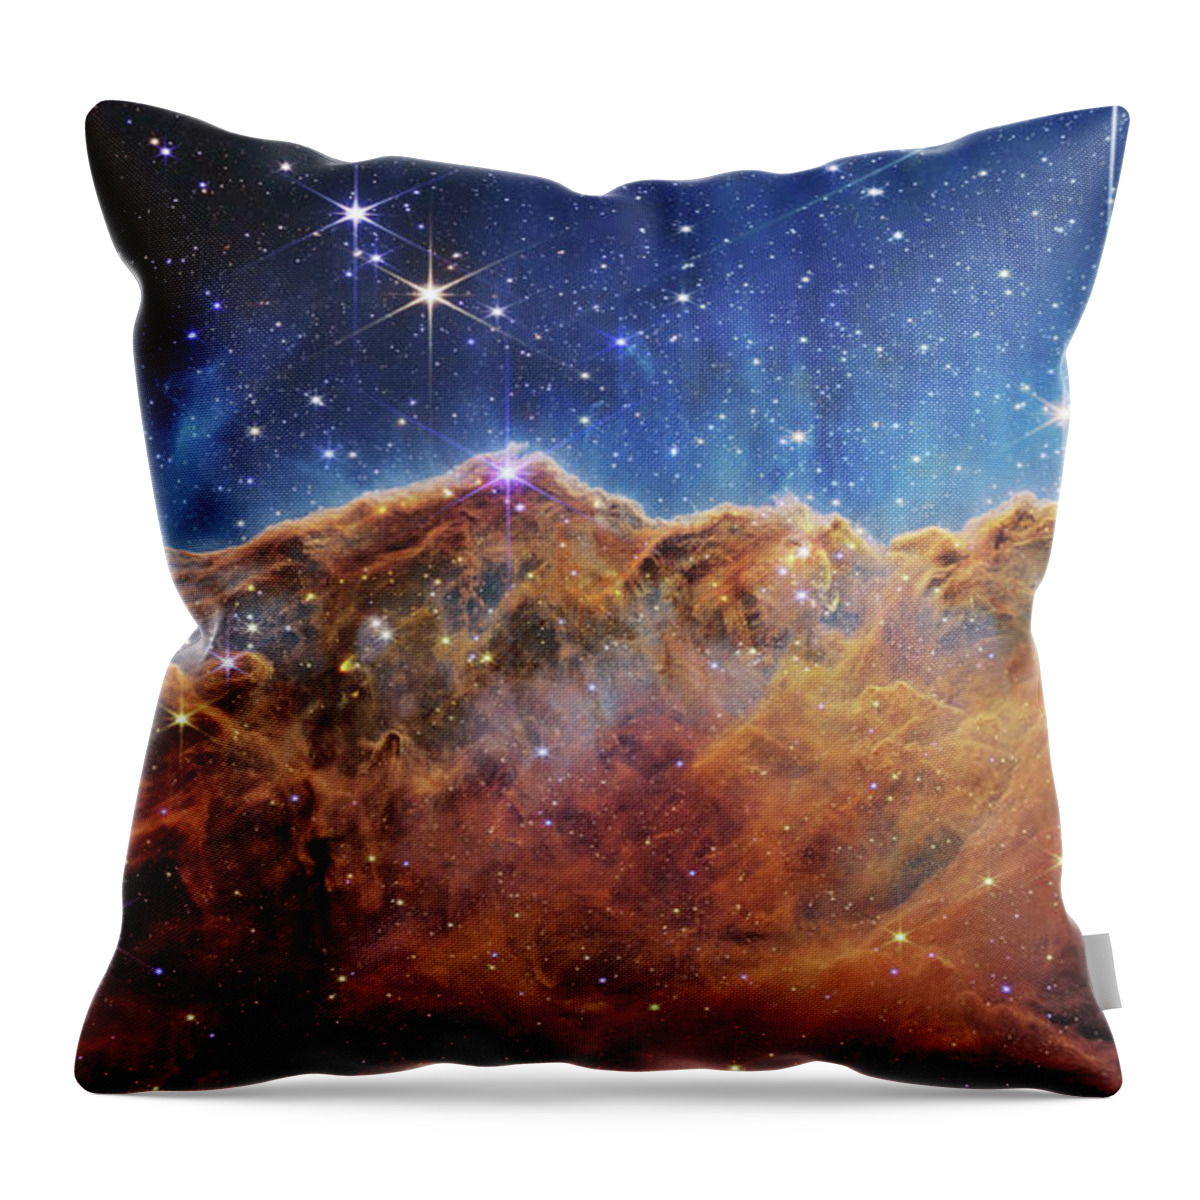 Astronomical Throw Pillow featuring the photograph C056/2352 by Science Photo Library